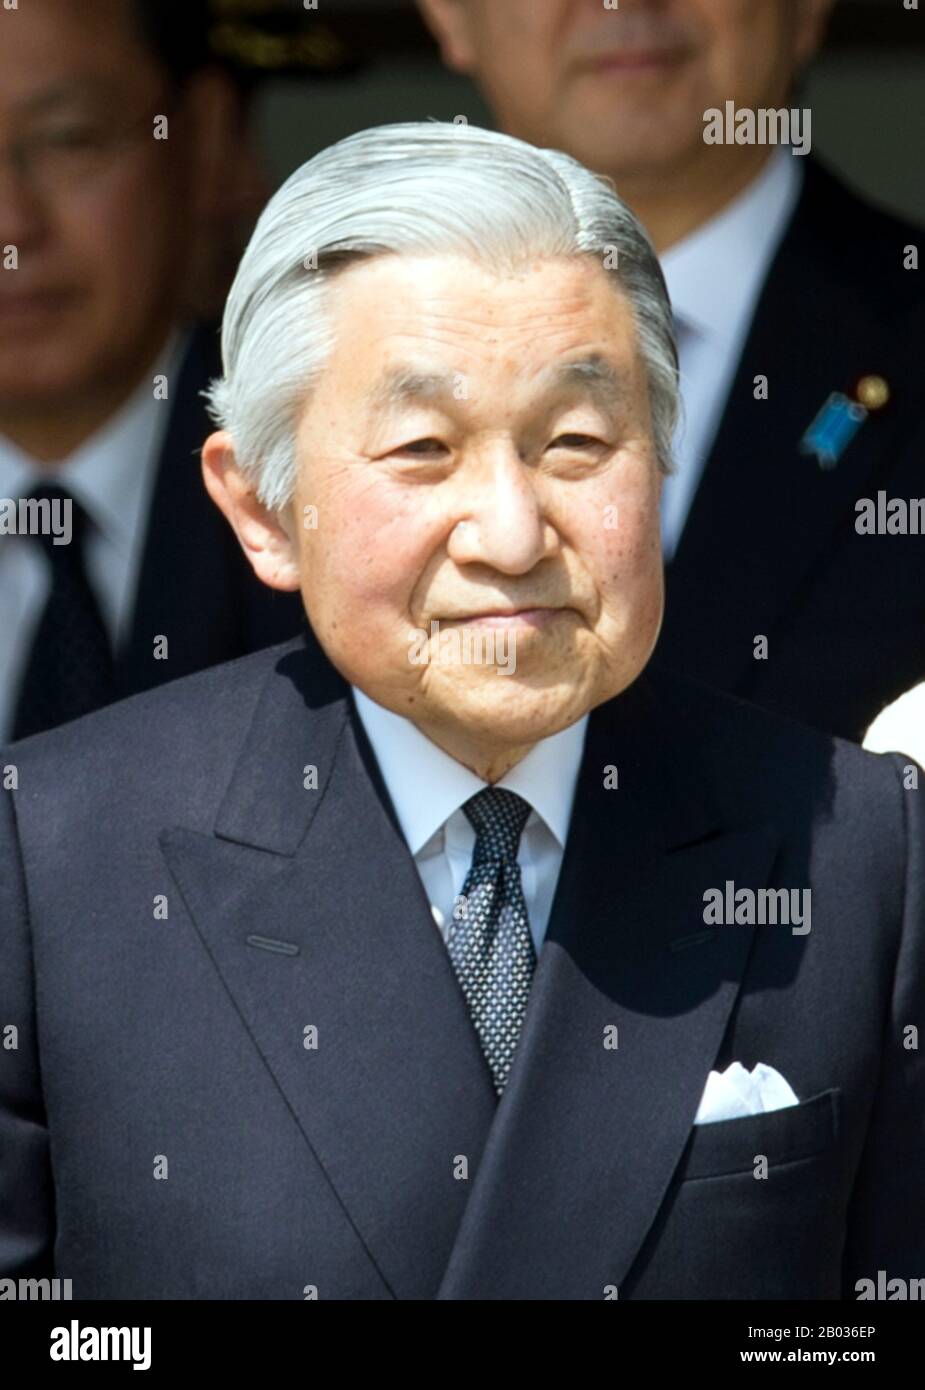 Japan: Akihito (1933 - ), 125th Emperor of Japan (1989 - 2019), at the Tokyo Imperial Palace, 24 April 2014. Akihito (born 23 December 1933) is the reigning Emperor of Japan. He is the 125th emperor of his line according to Japan's traditional order of succession. Akihito succeeded his father Showa and acceded to the Chrysanthemum Throne on 7 January 1989. He abdicated on 30 April 2019. Stock Photo